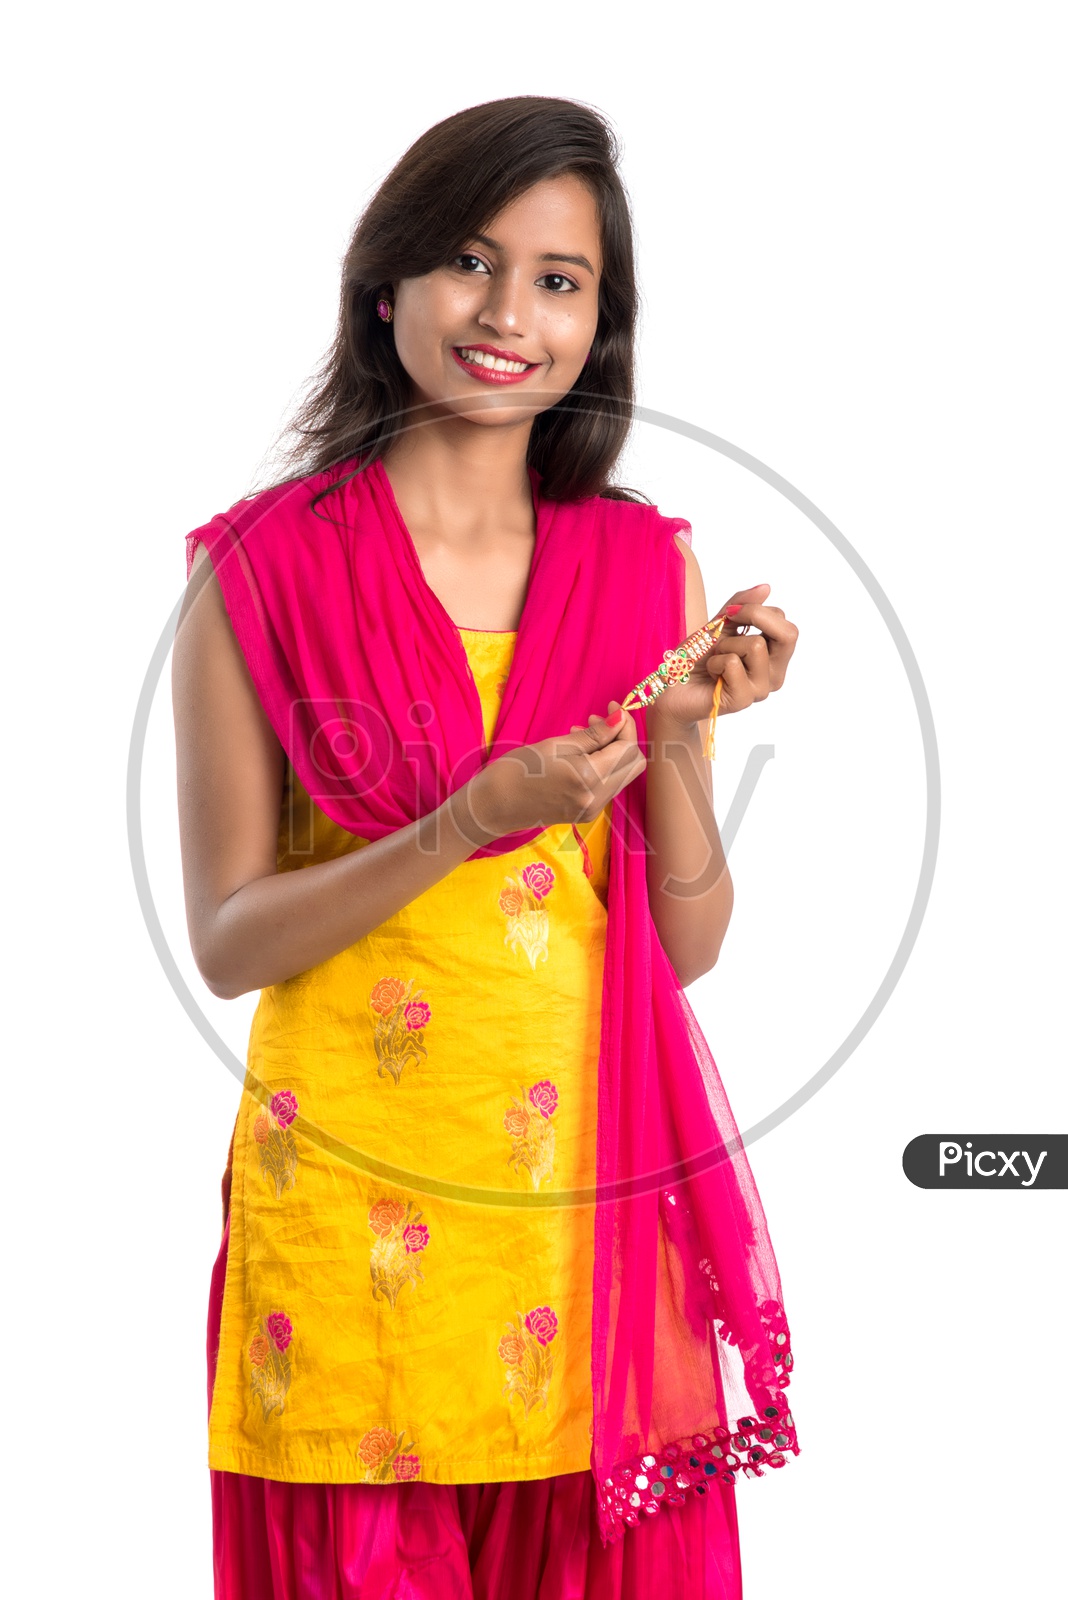 Young Indian Girl Or Woman Or Sister Holding Rakhi  With Expressions On an Isolated White Background 
Young Indian Girl Or Woman Or Sister Holding Rakhi  With Expressions On an Isolated White Background